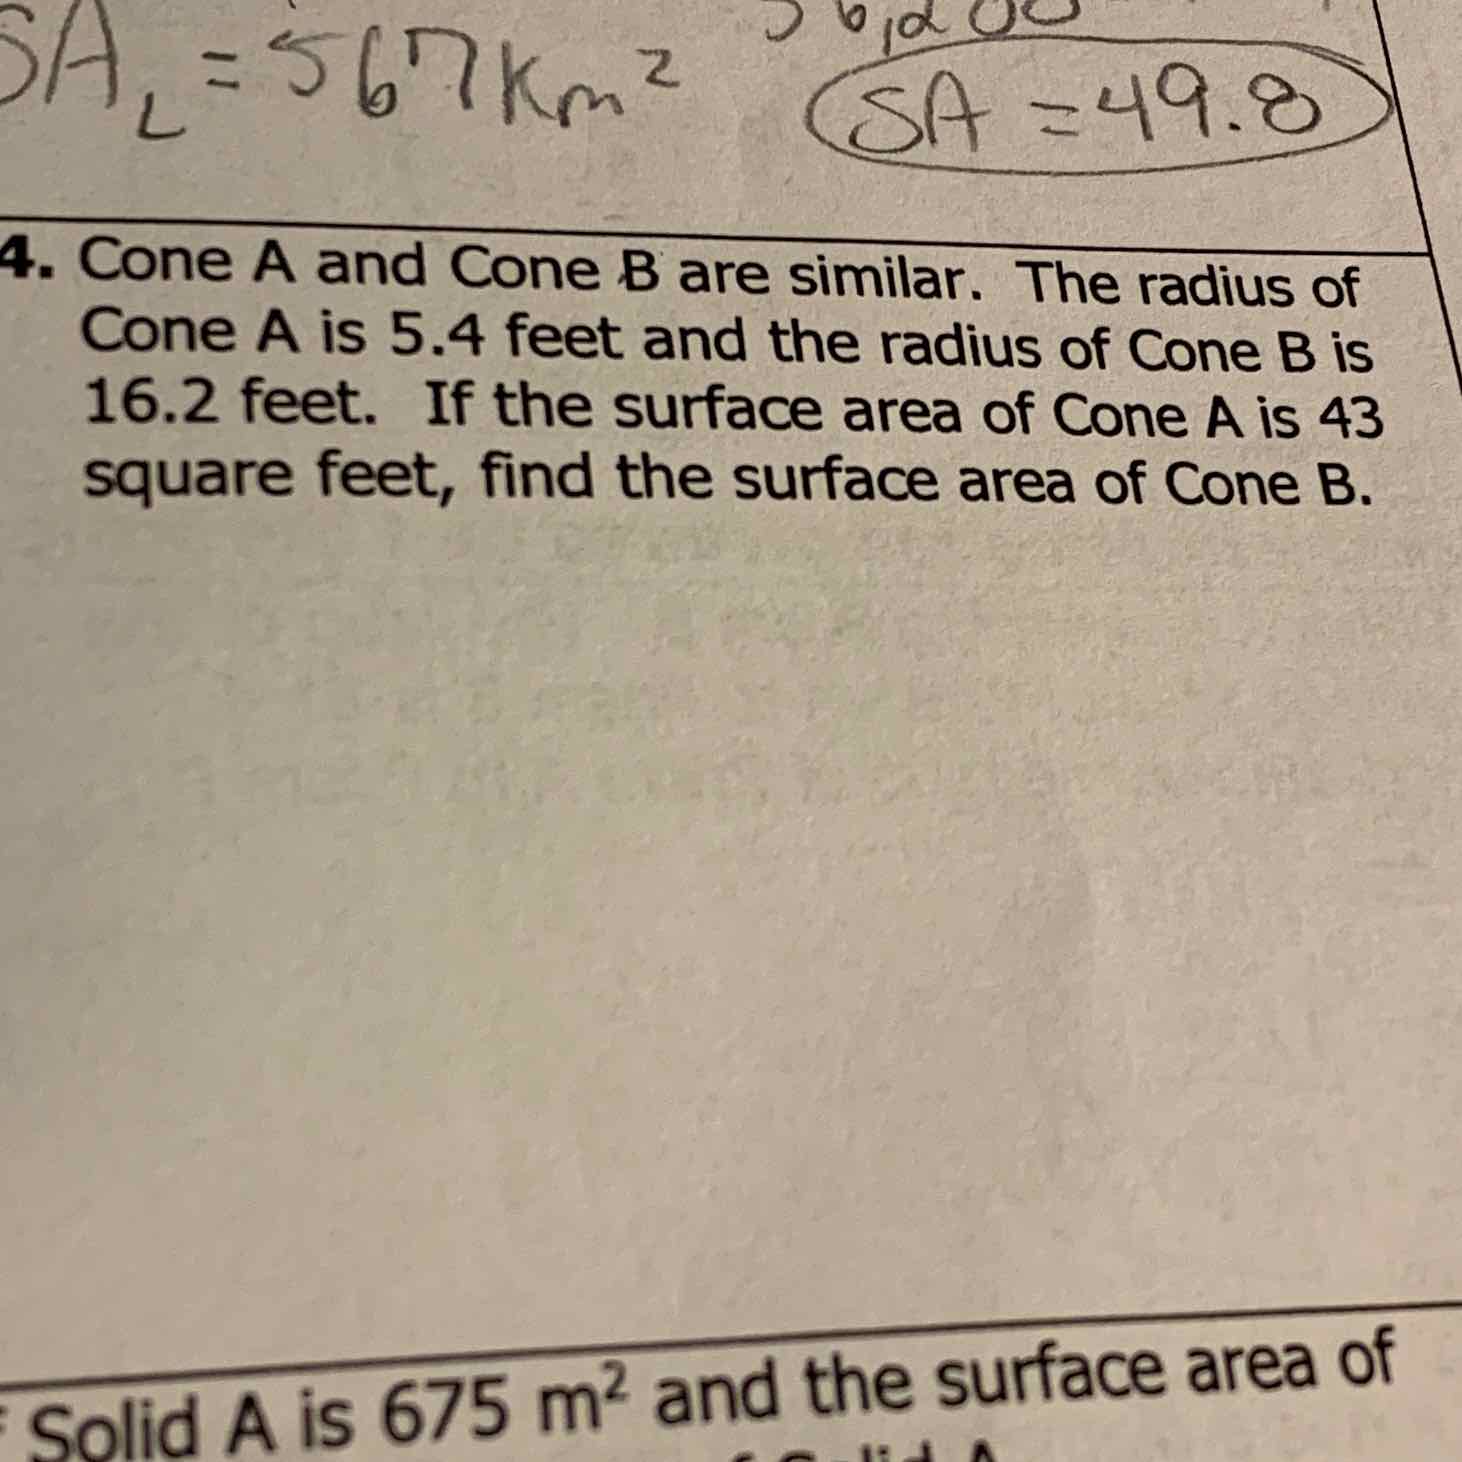 4. Cone \( A \) and Cone \( B \) are similar. The radius of Cone \( A \) is \( 5.4 \) feet and the radius of Cone \( B \) is \( 16.2 \) feet. If the surface area of Cone \( A \) is 43 square feet, find the surface area of Cone \( B \).
Solid \( A \) is \( 675 \mathrm{~m}^{2} \) and the surface area of